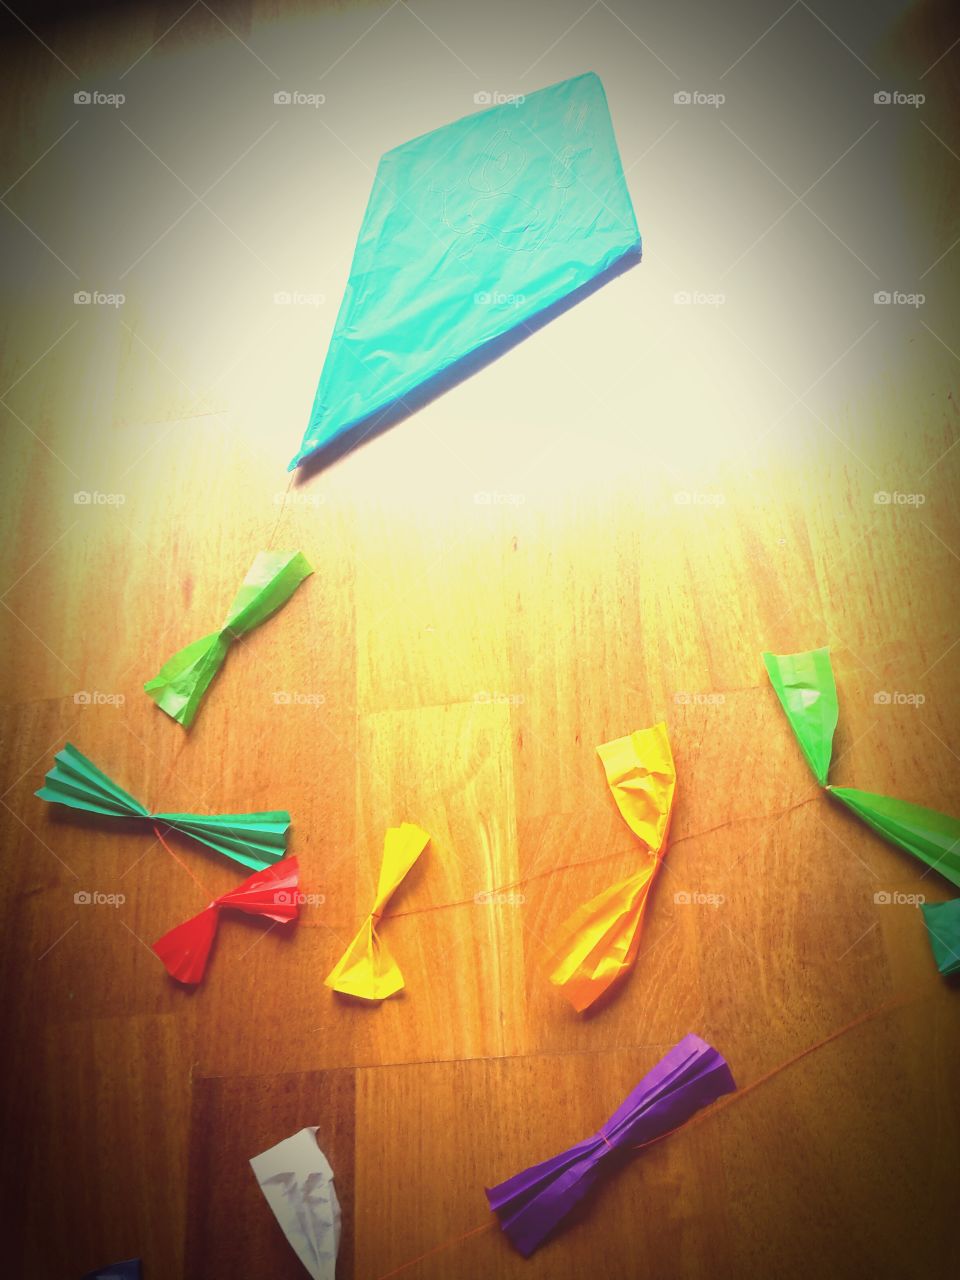 diy blue kite with colorful tail